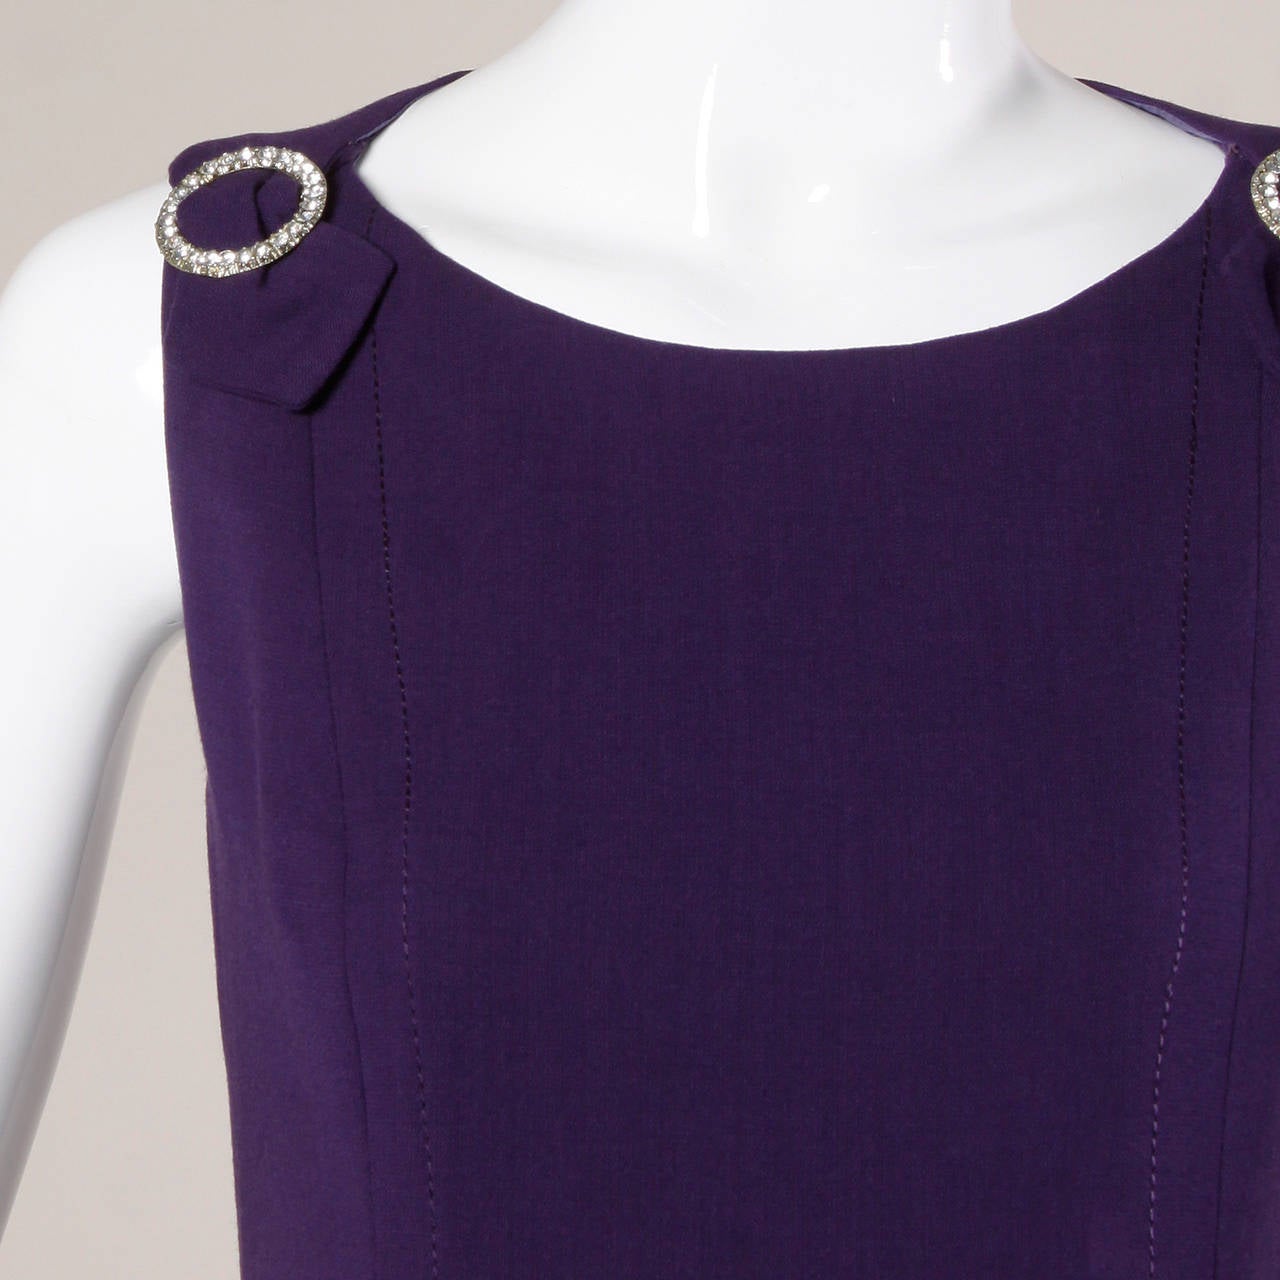 Absolutely stunning couture construction! Hand stitched wool 1960s vintage dress in deep purple wool with creamy purple silk lining and a car wash hem. Rhinestone detail at the shoulders. 

Unfortunately there is no designer label but the